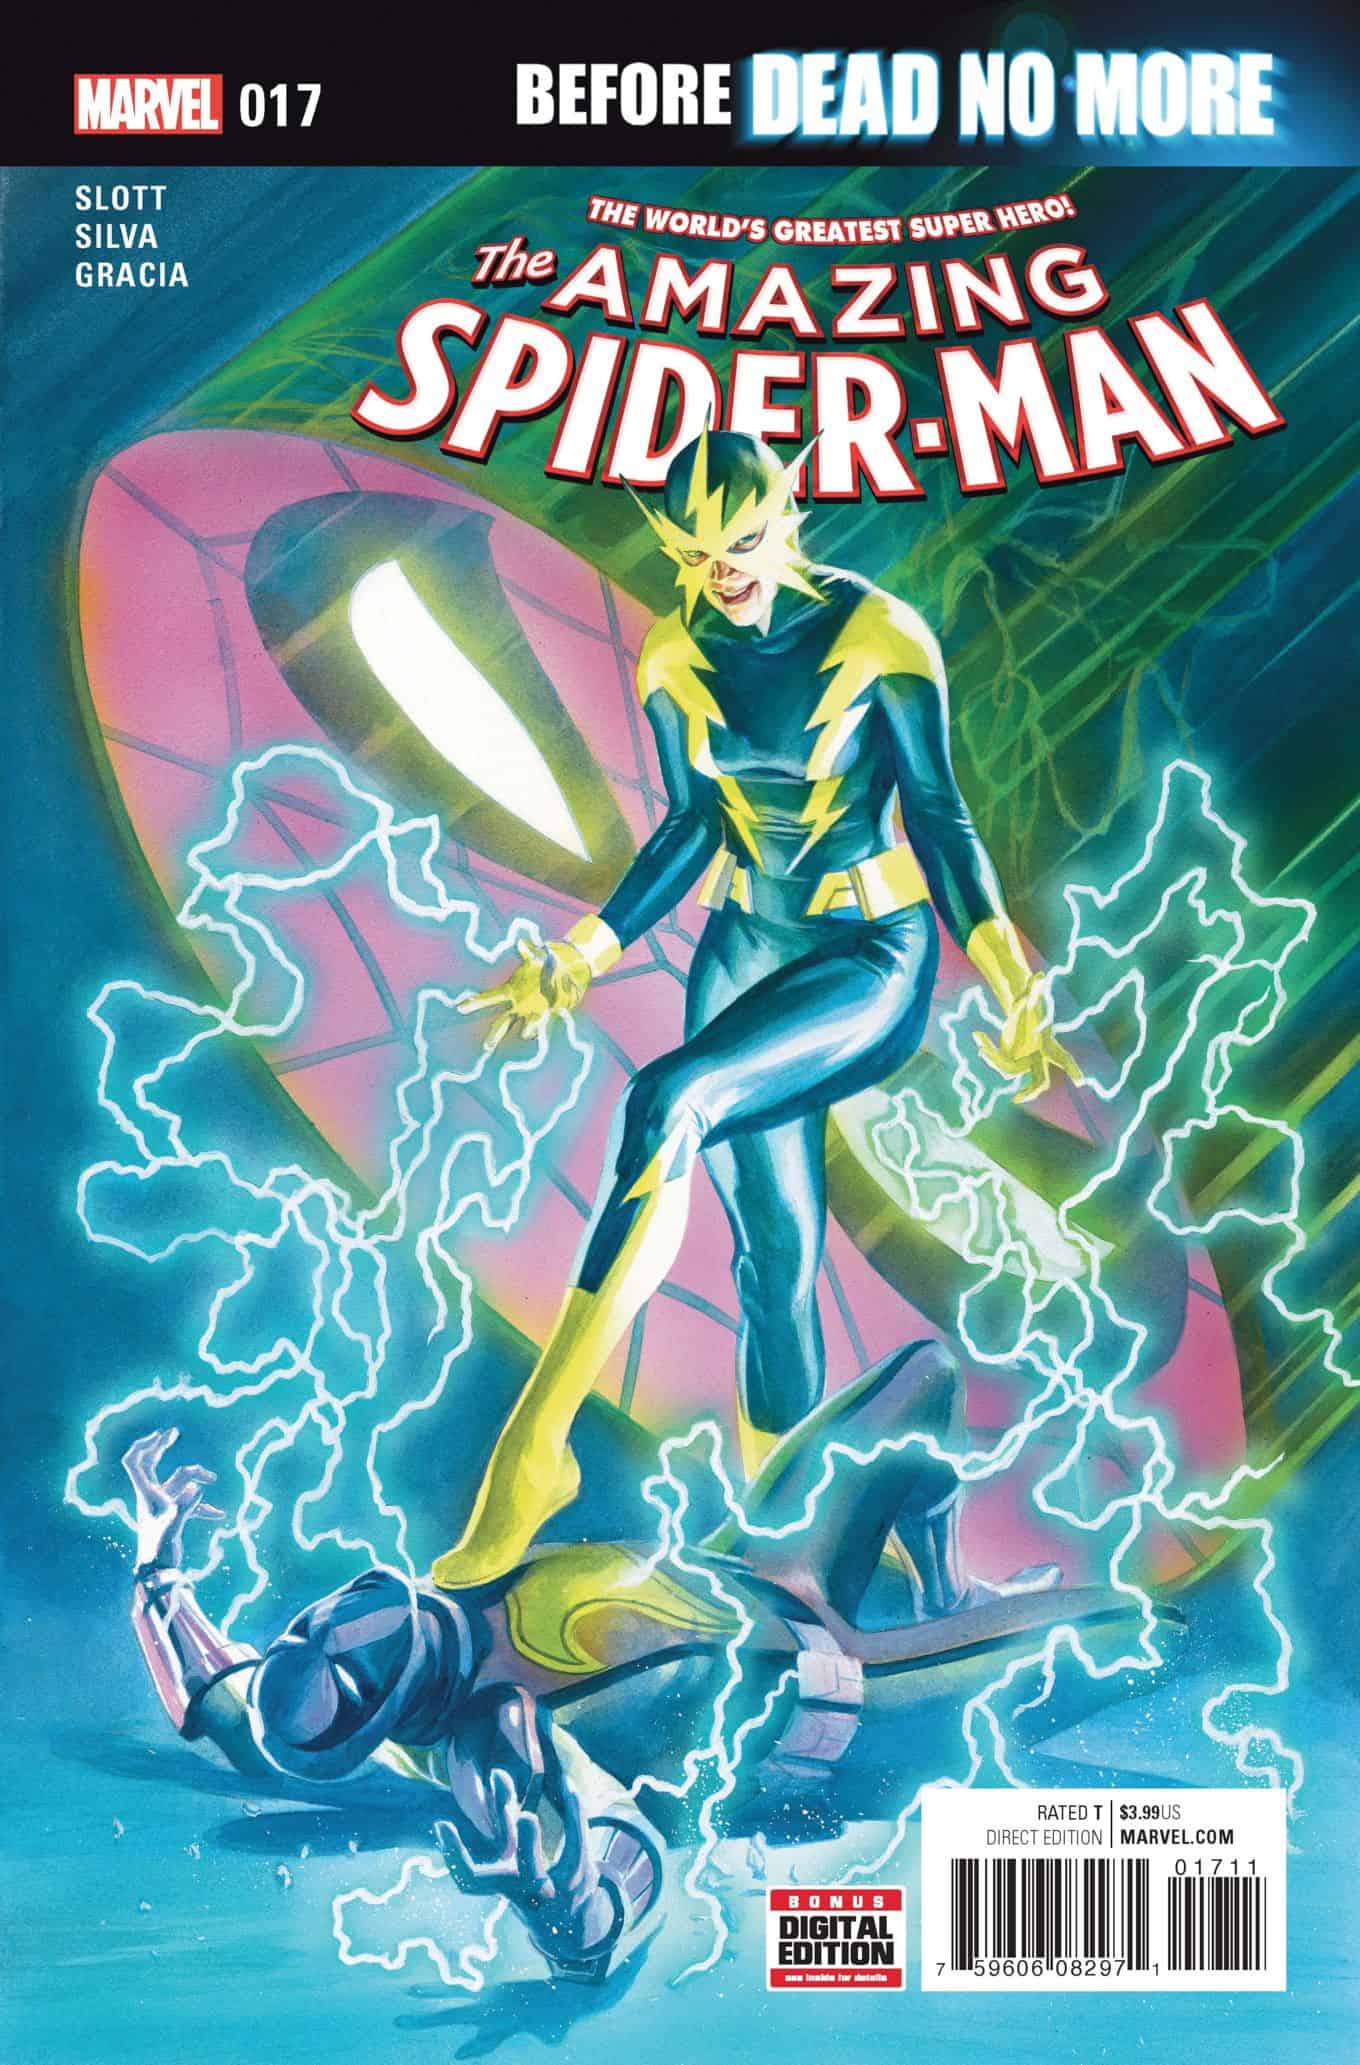 Amazing Spider-Man #17 spoilers preview 1